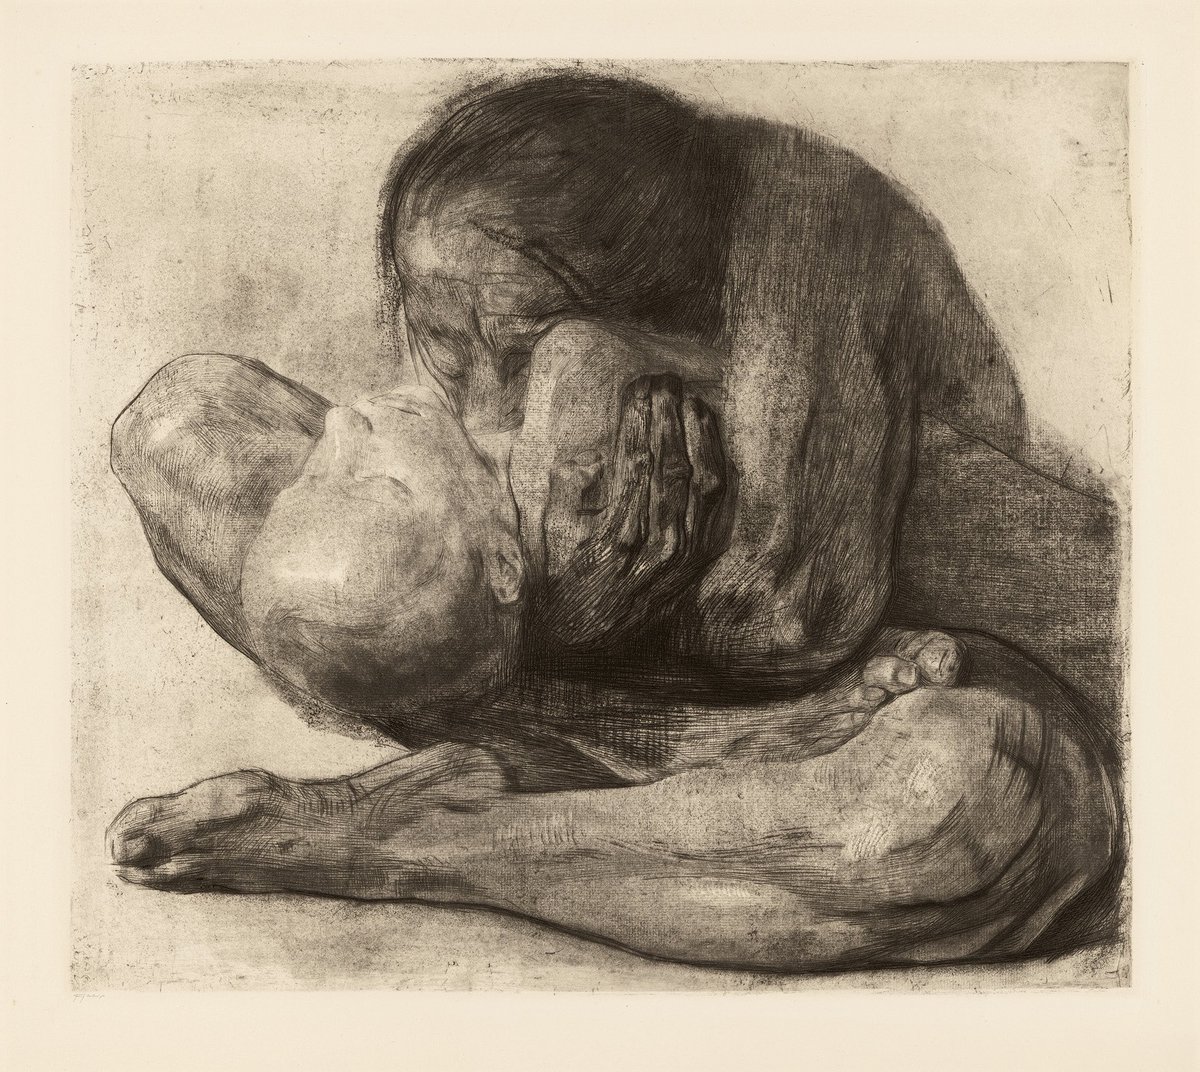 I wouldn’t say it “destroys” me necessarily but Woman with Dead Child by Käthe Kollwitz is pretty heavy